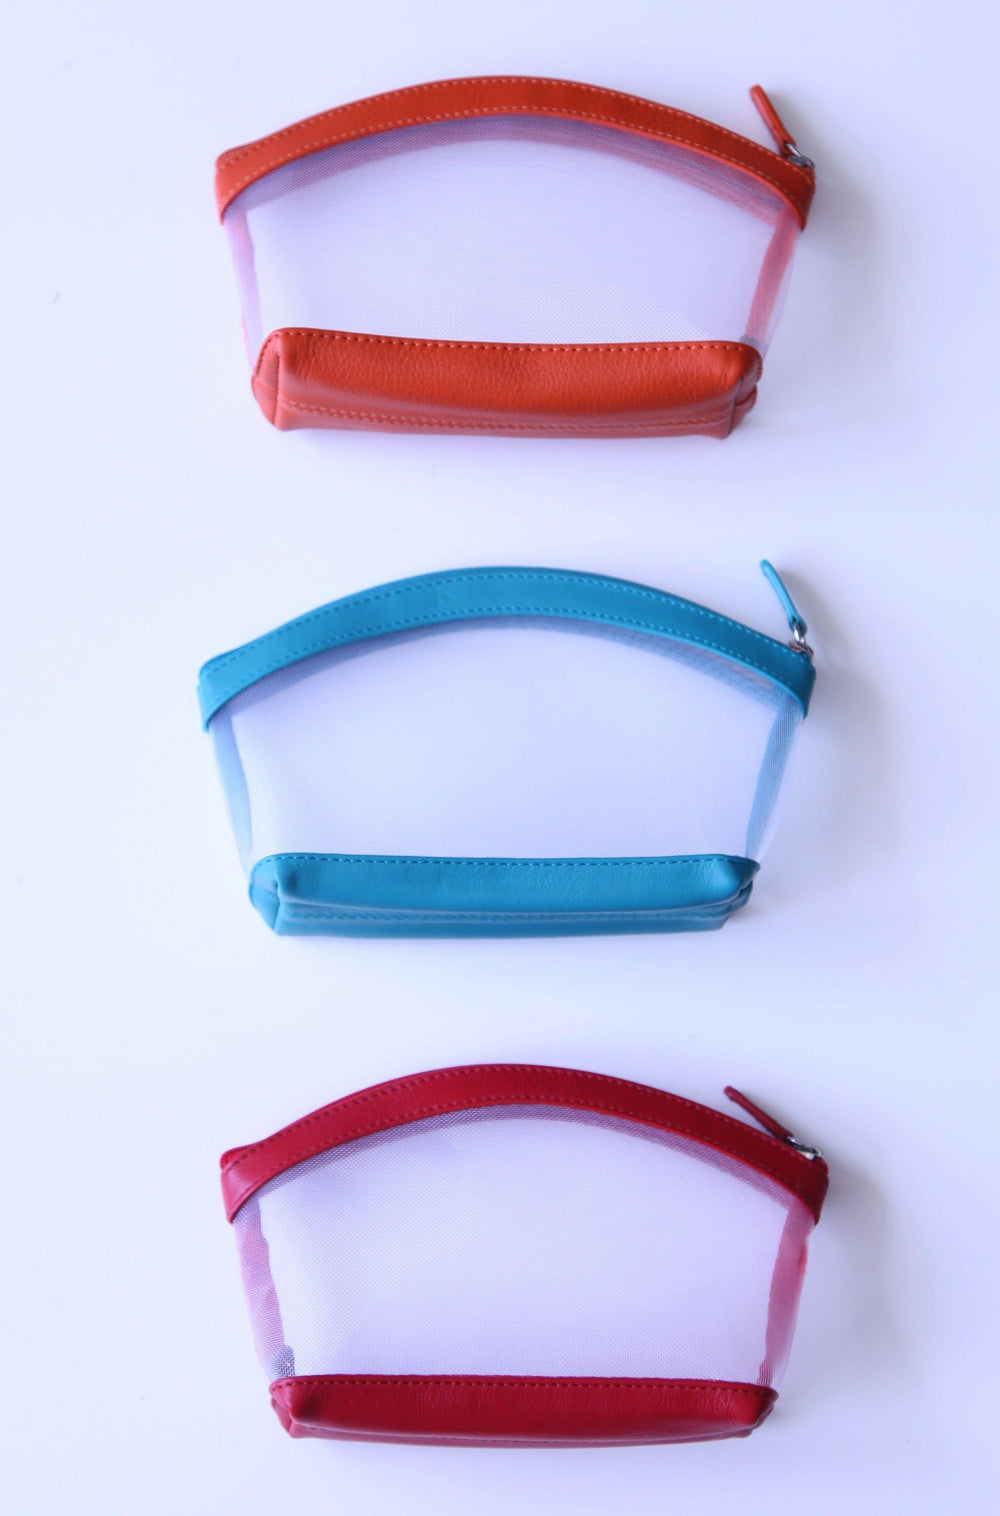 Light blue, red, and orange med pouches